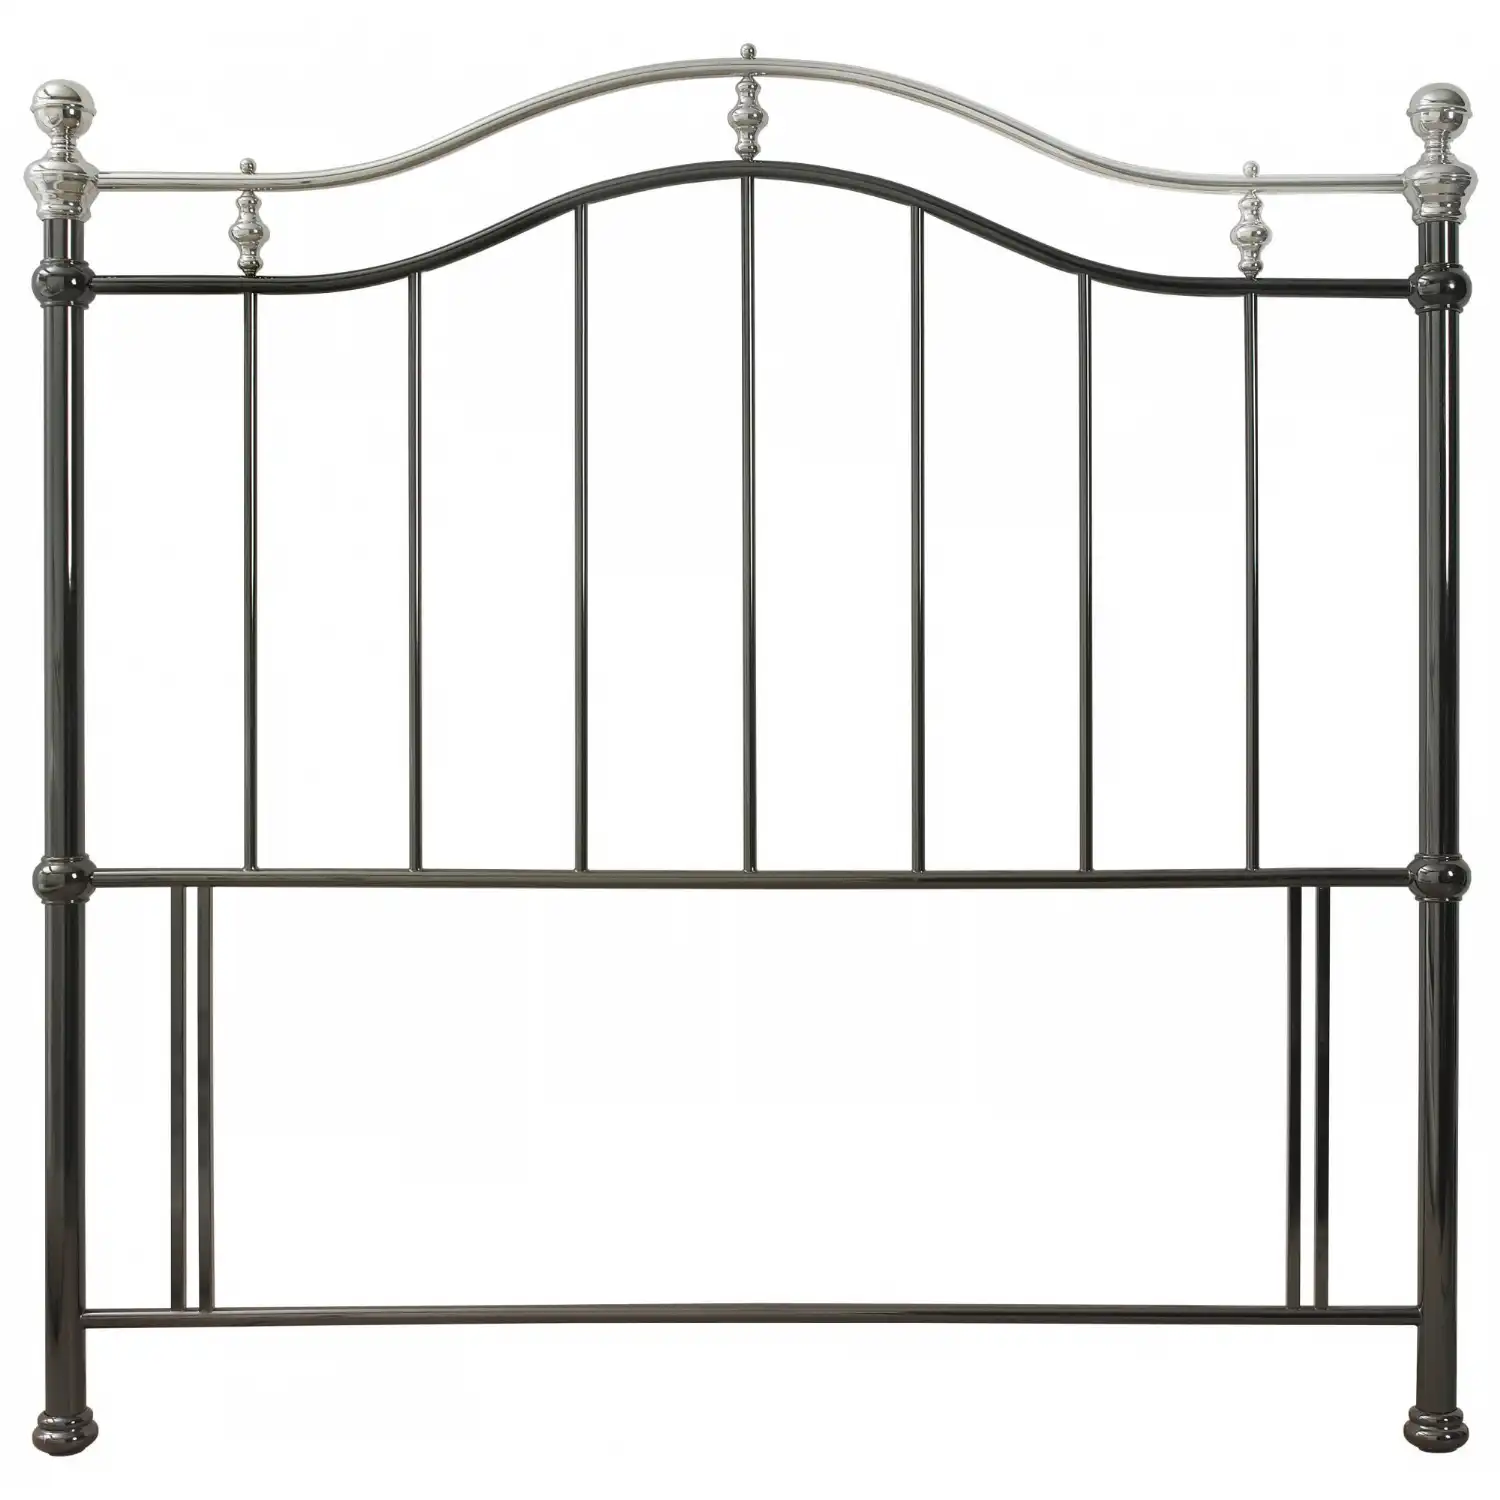 Shiny Nickel Metal Traditional Arched Headboard 4ft6 Double